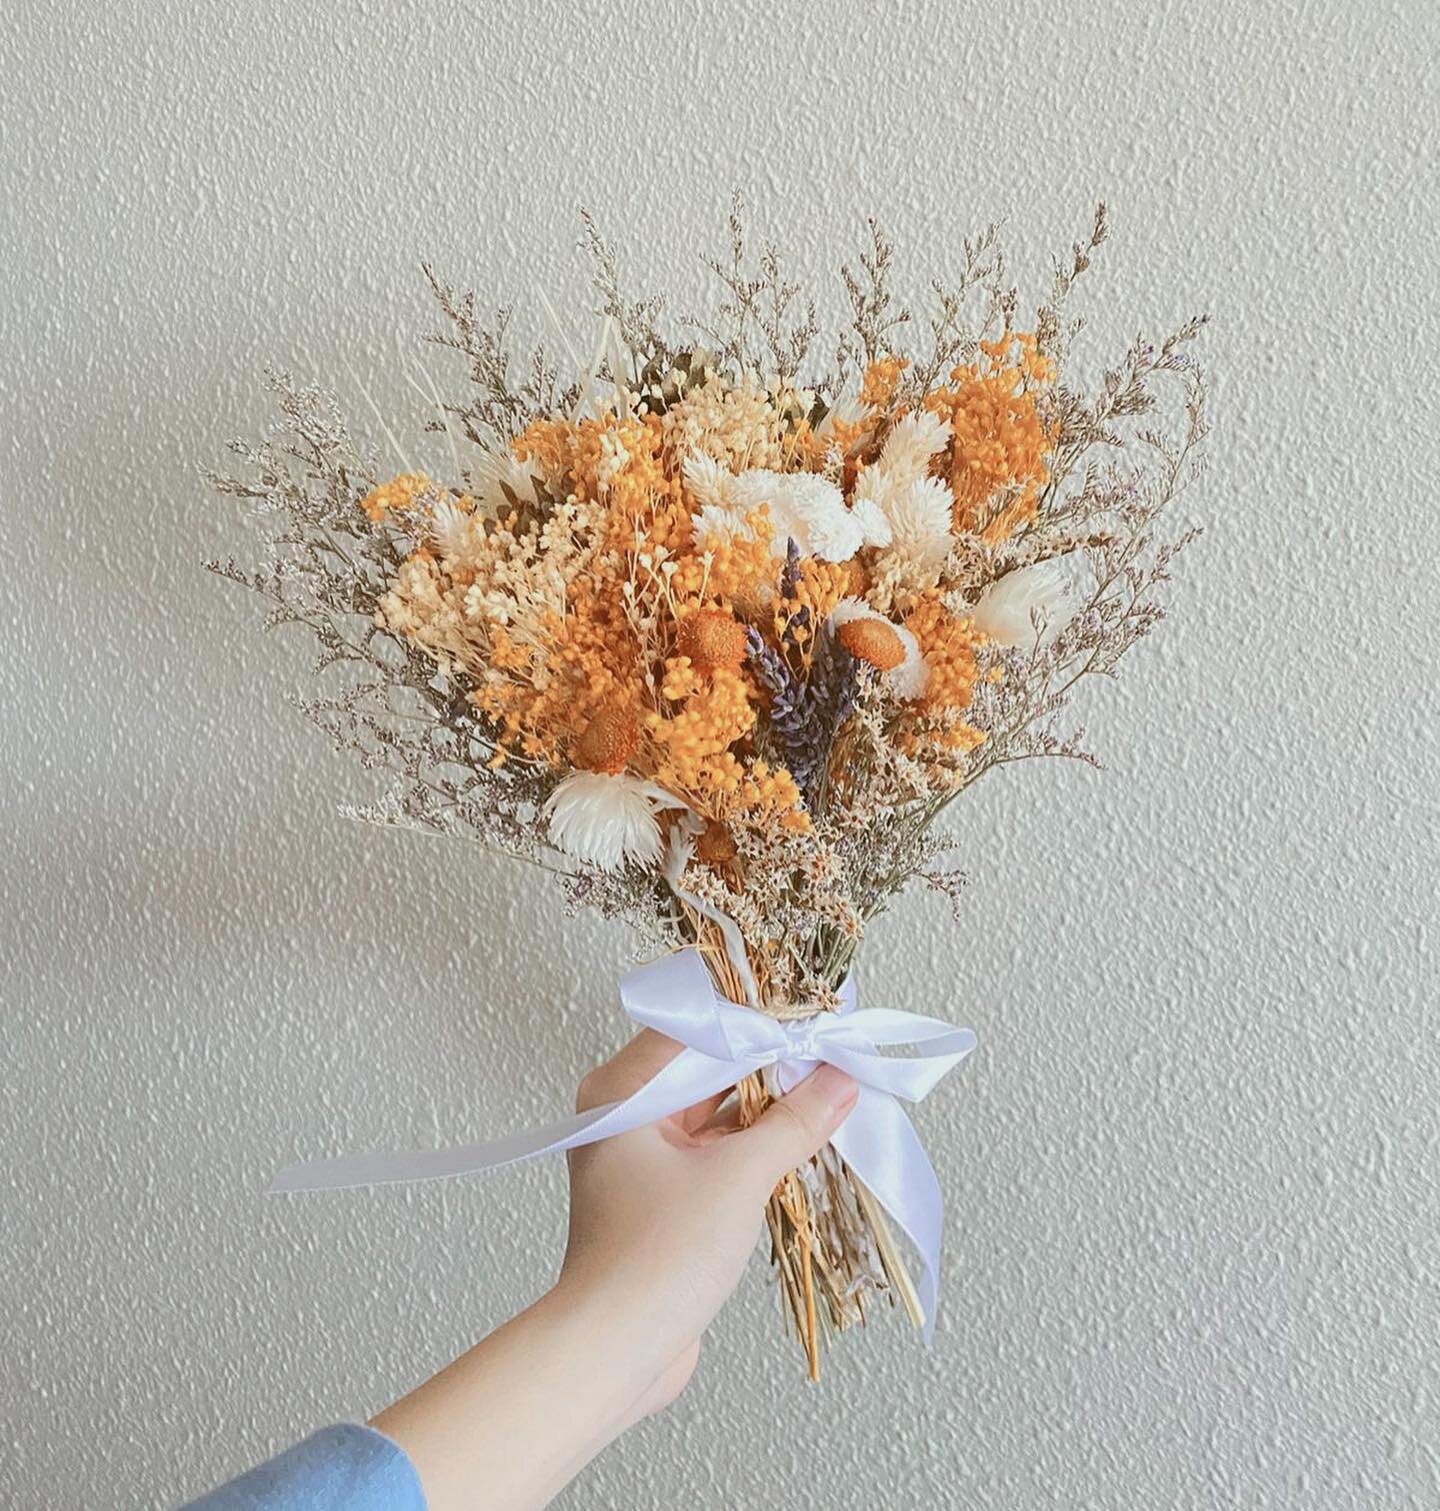 Bridal bouquet with dried flowers which is perfect as a keepsake after the wedding! ✨